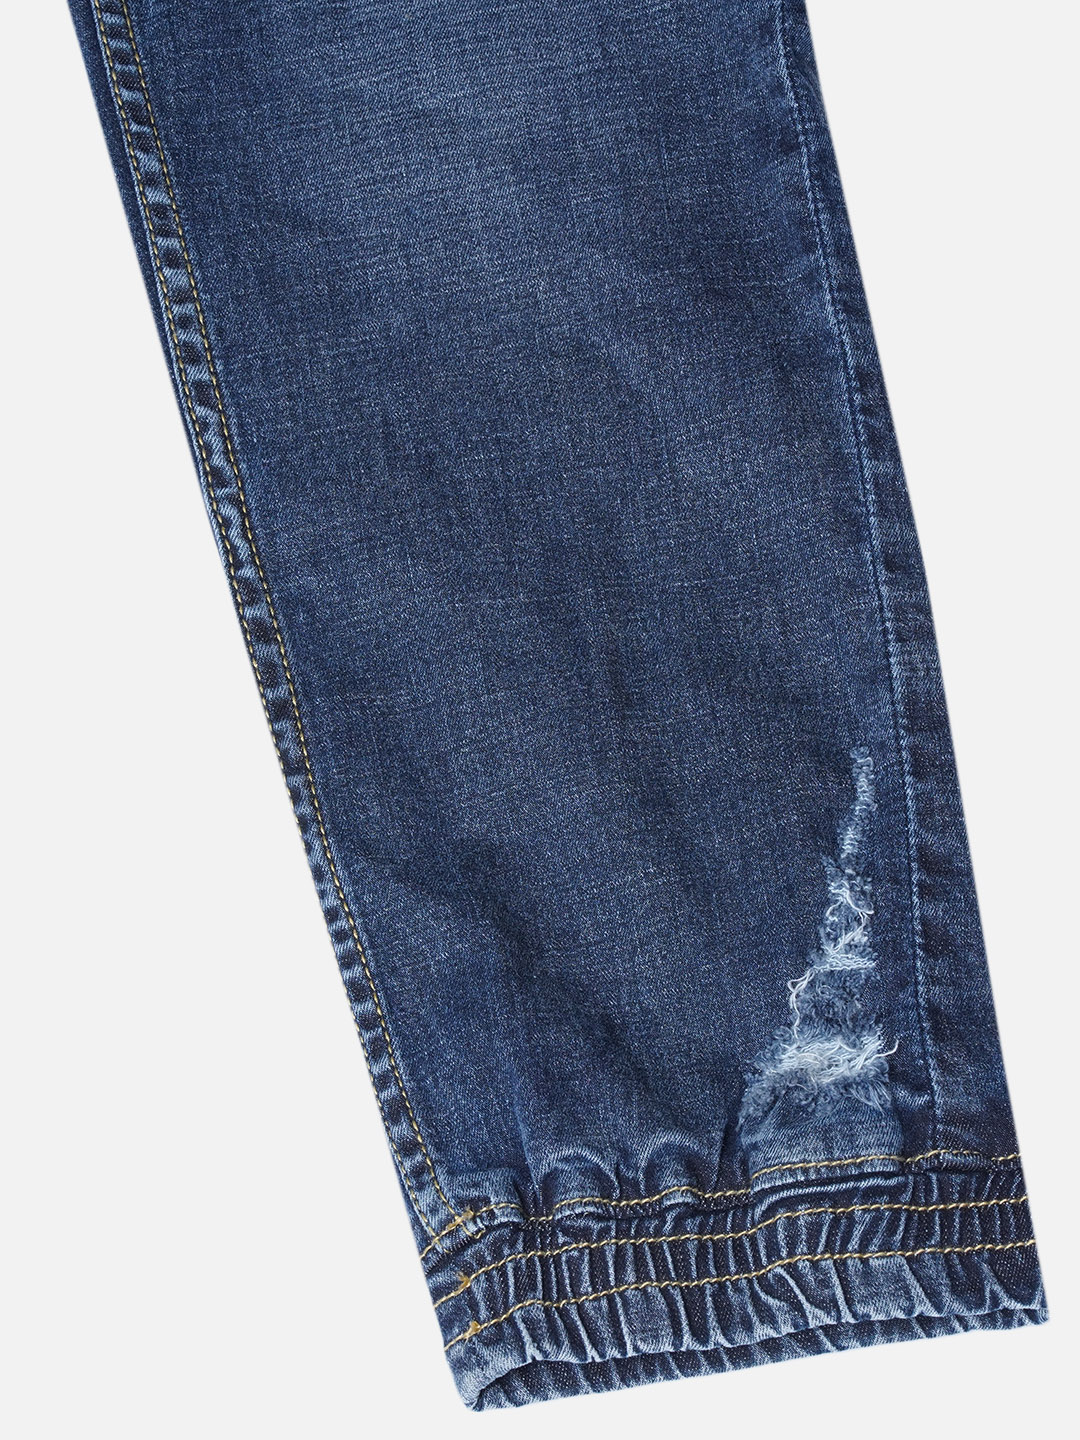 Distressed Rough Jeans 